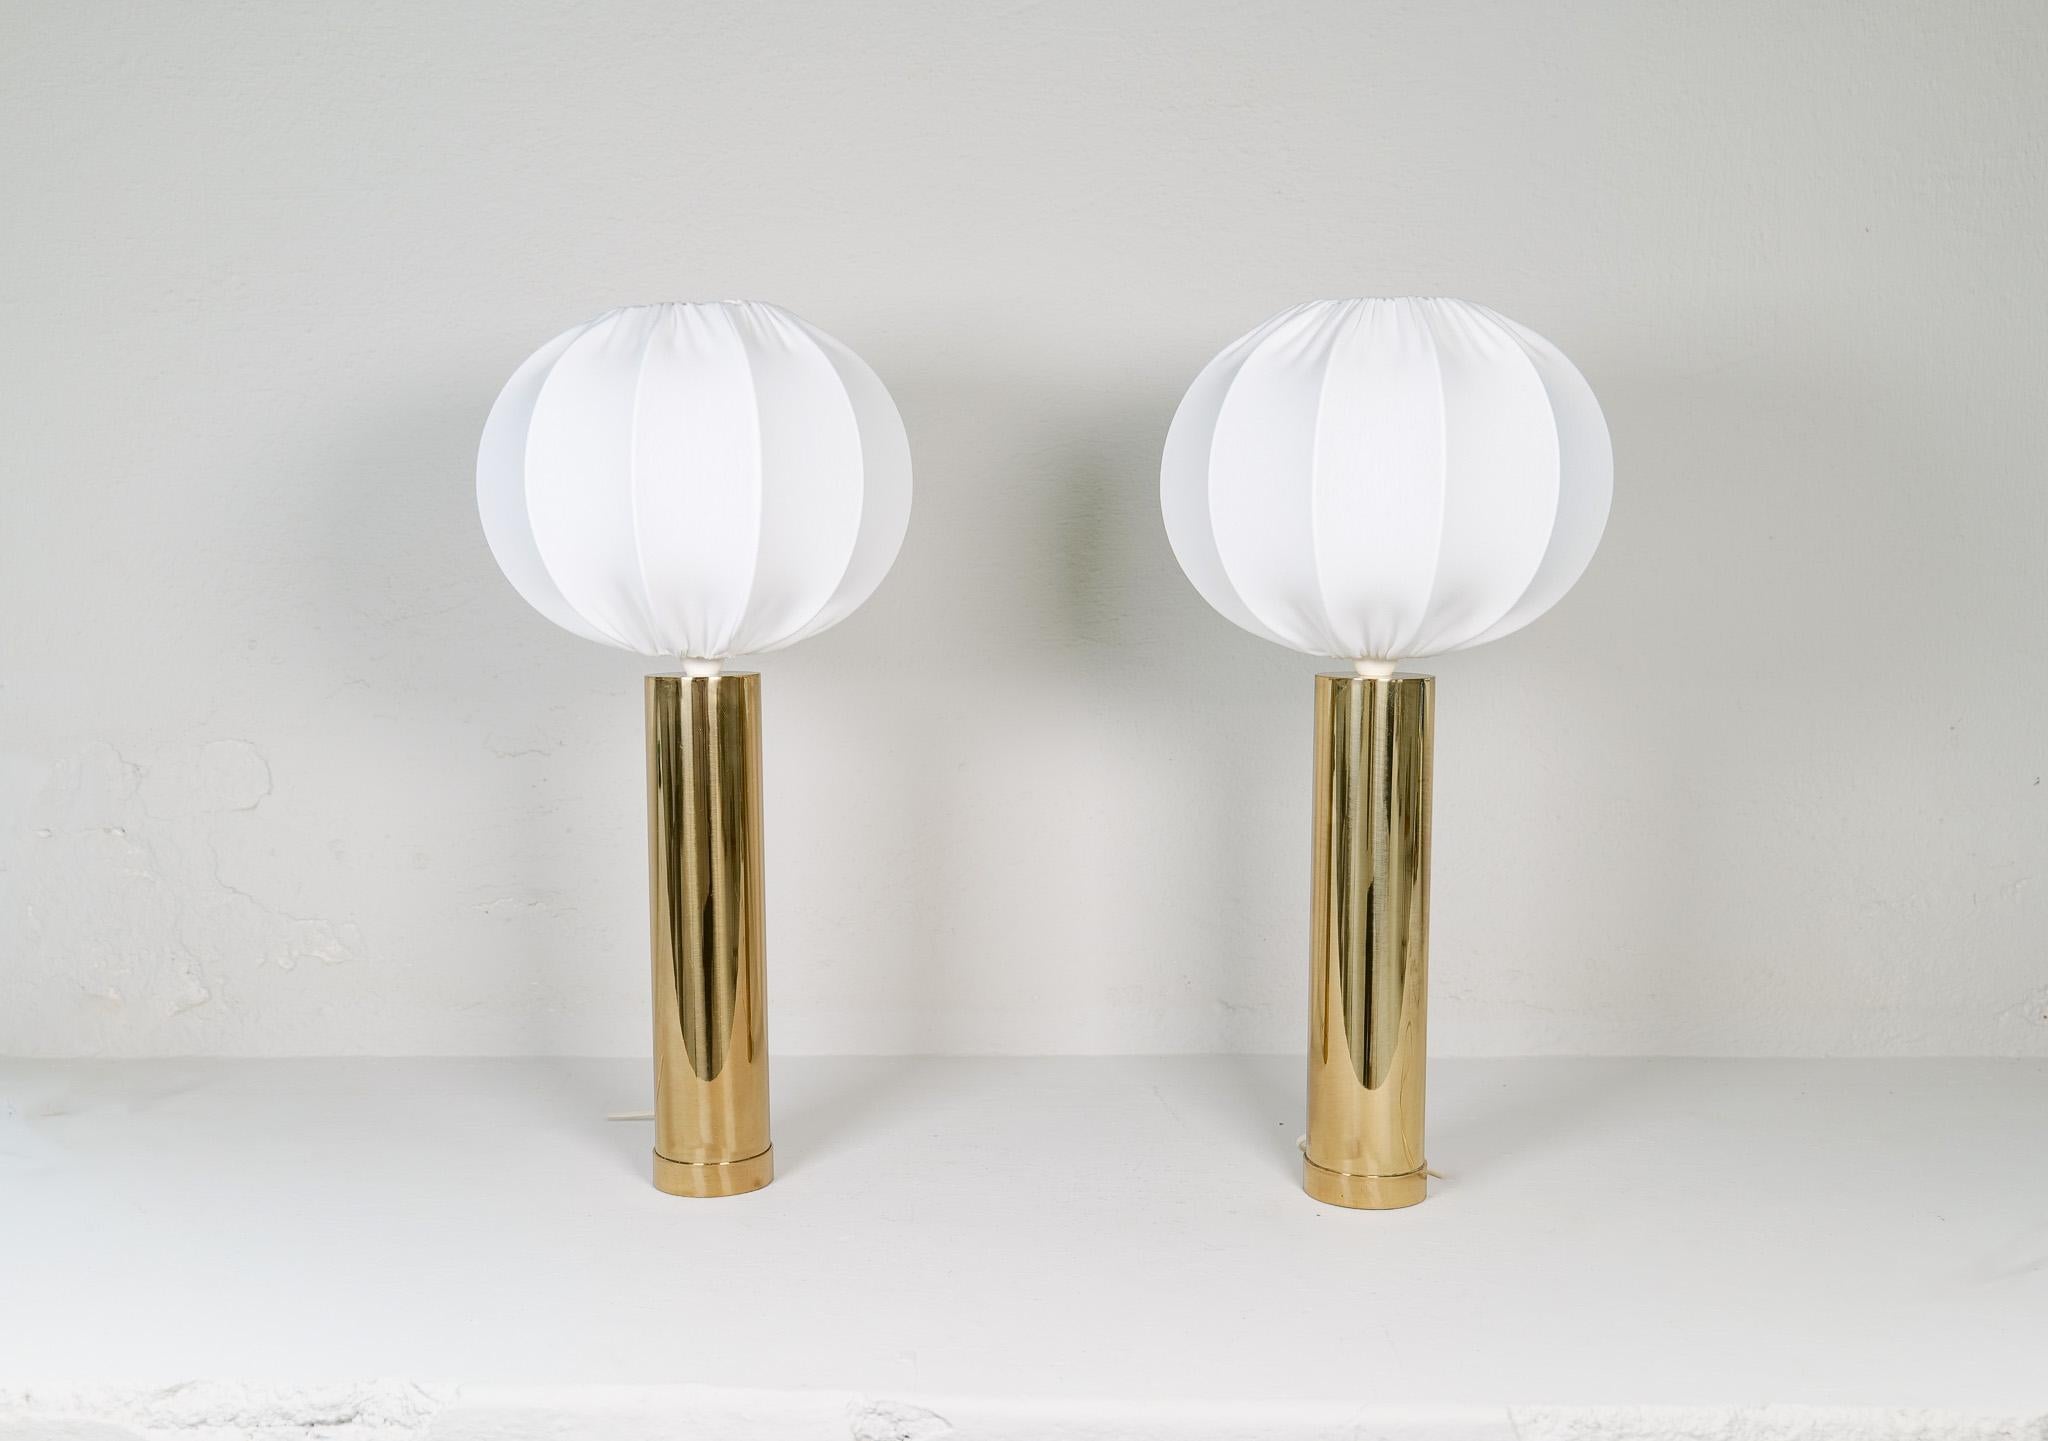 Midcentury Pair of Large Brass Bergboms B-010 Table Lamps, 1960s, Sweden In Good Condition For Sale In Hillringsberg, SE